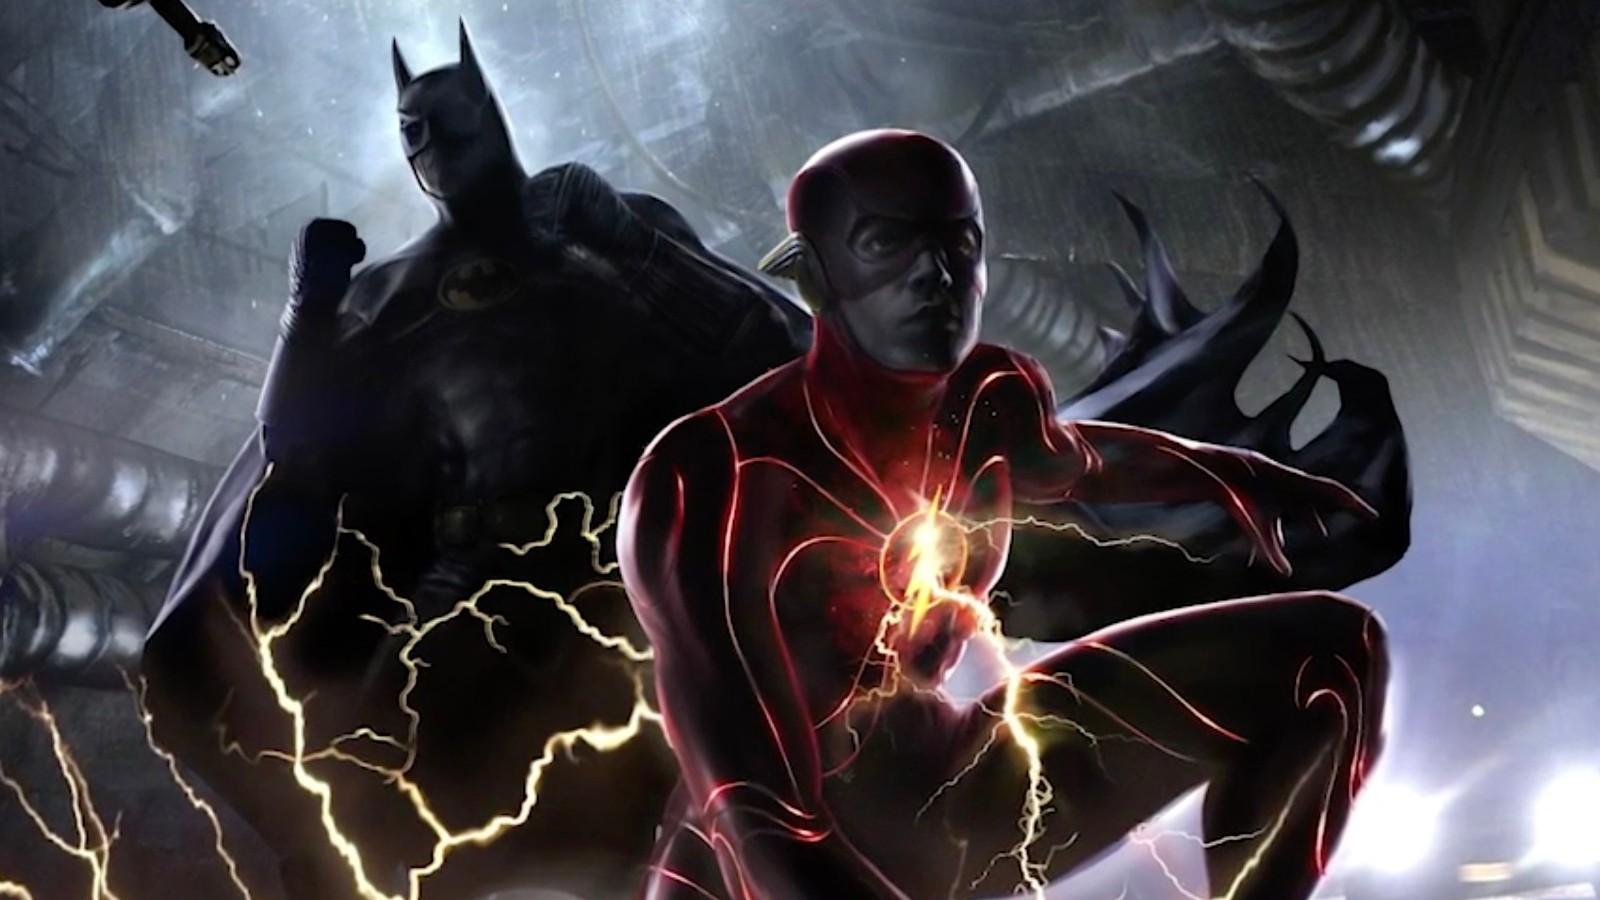 Concept art for The Flash movie